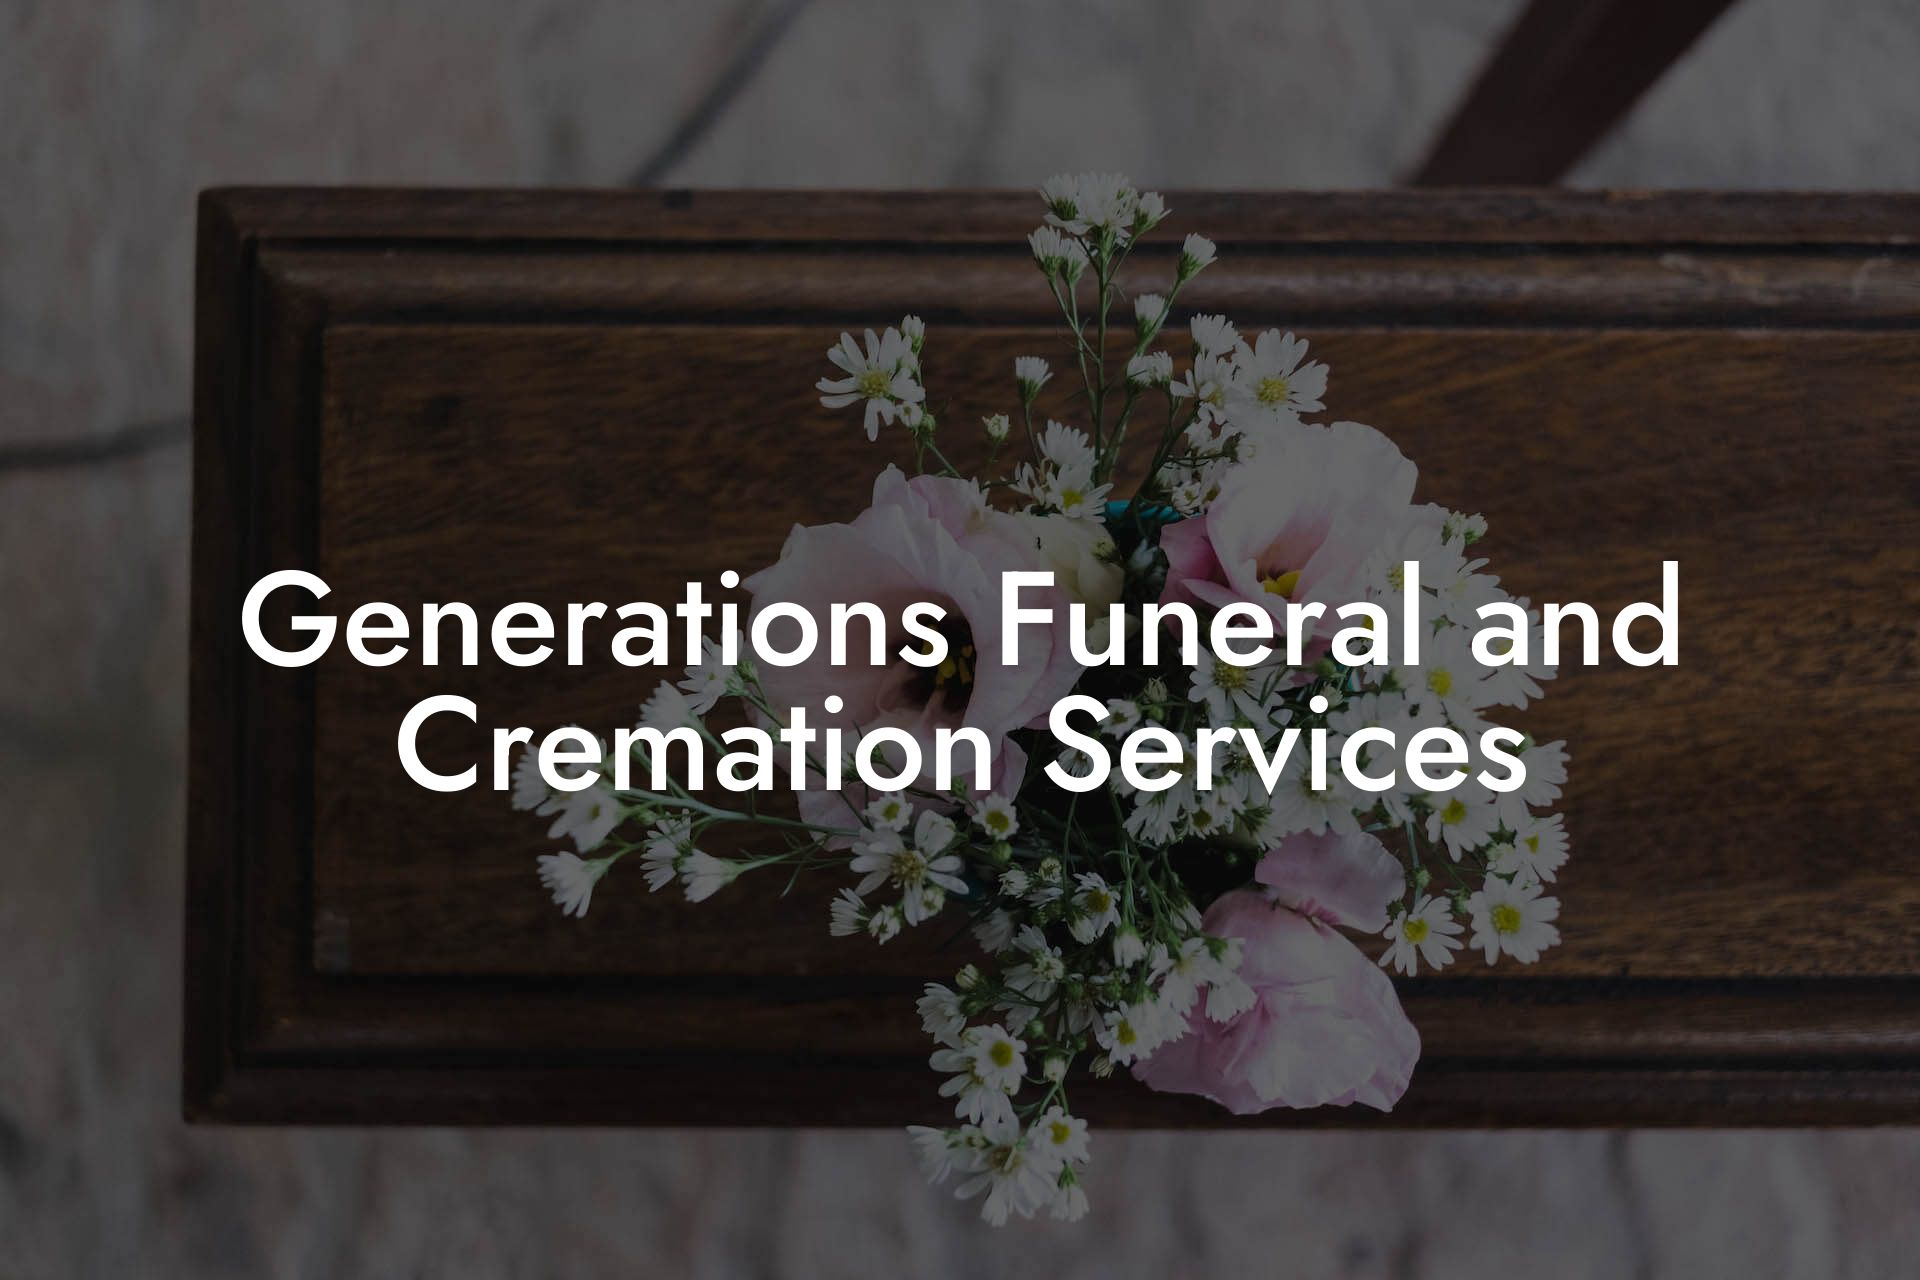 Generations Funeral and Cremation Services